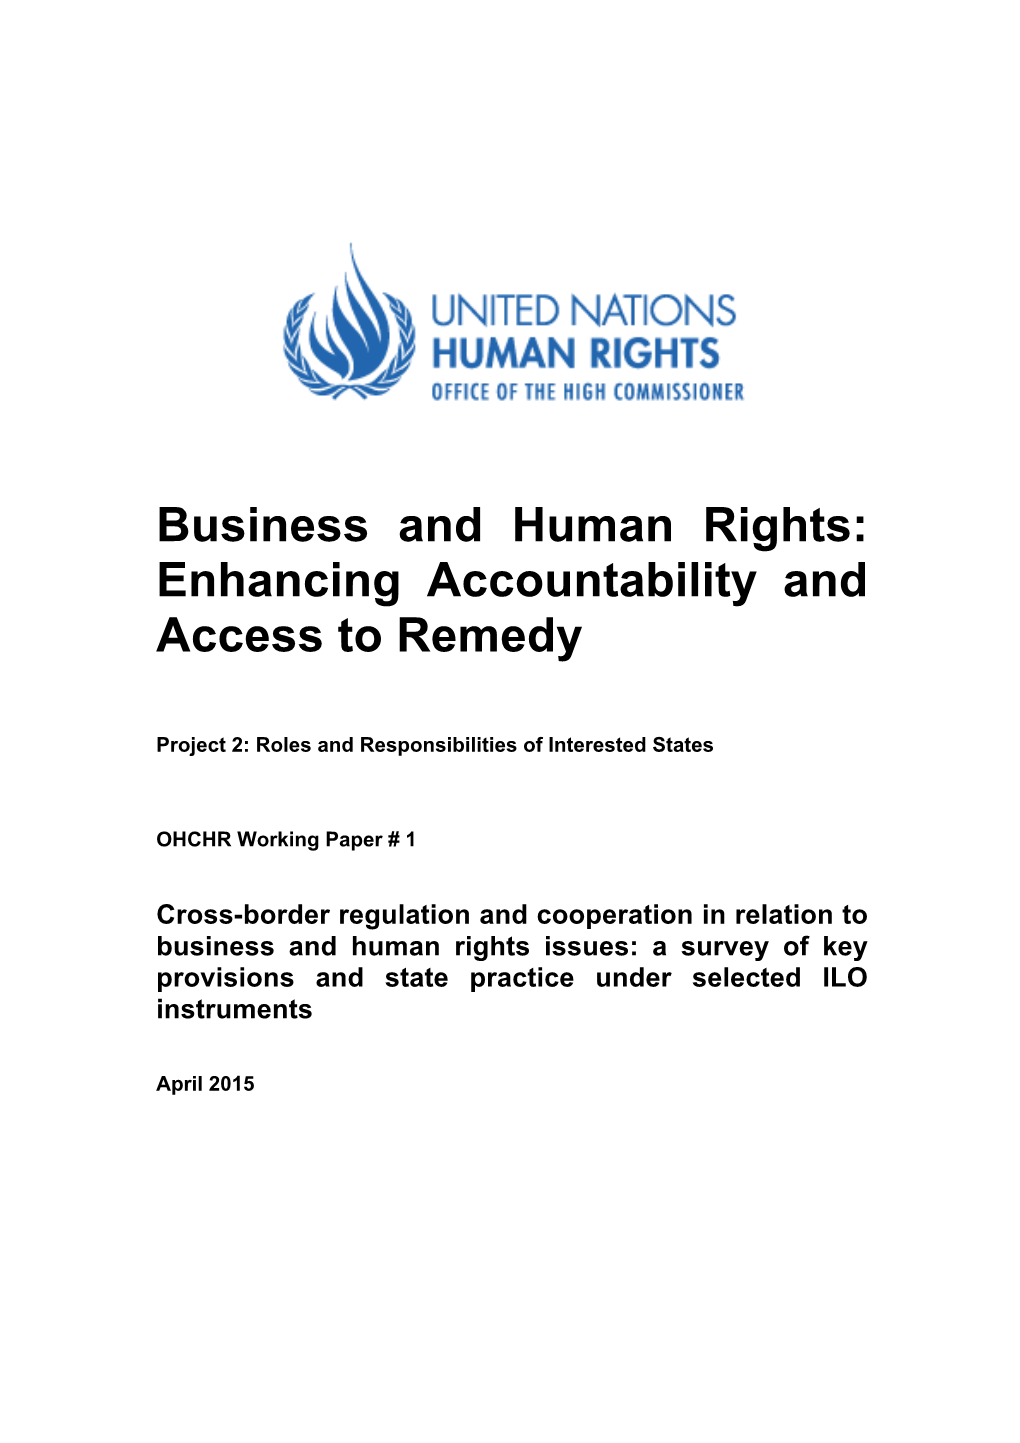 Project 2 Preliminary Study of ILO Treaties and State